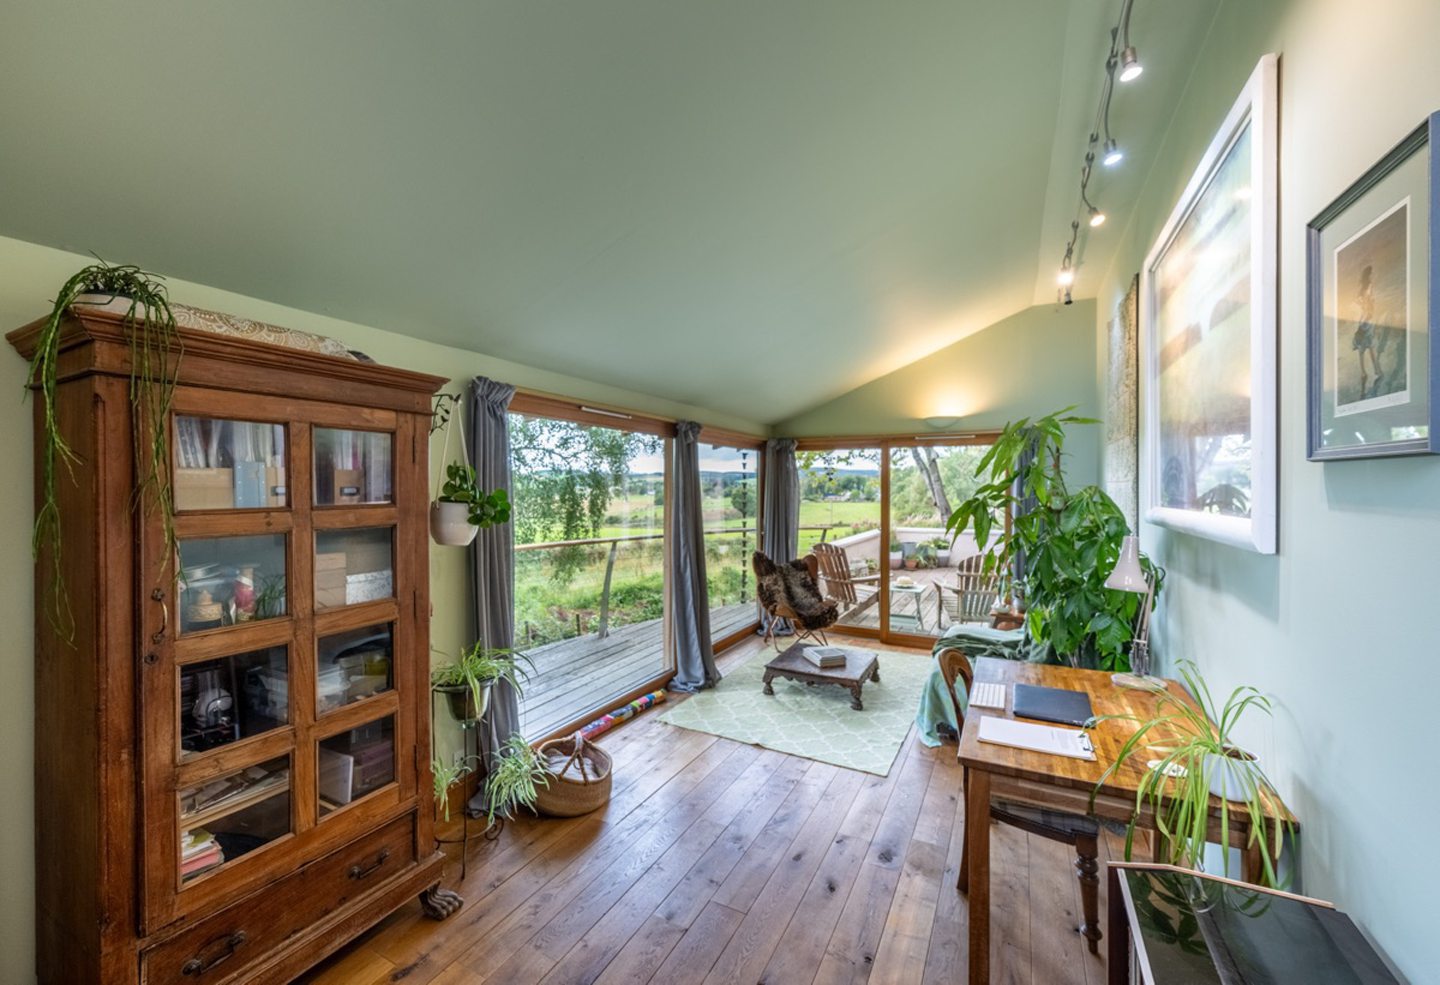 A room in the home with oak woods and soft green walls with a matching rug. There are several lush and healthy houseplants getting lots of natural light from the large windows